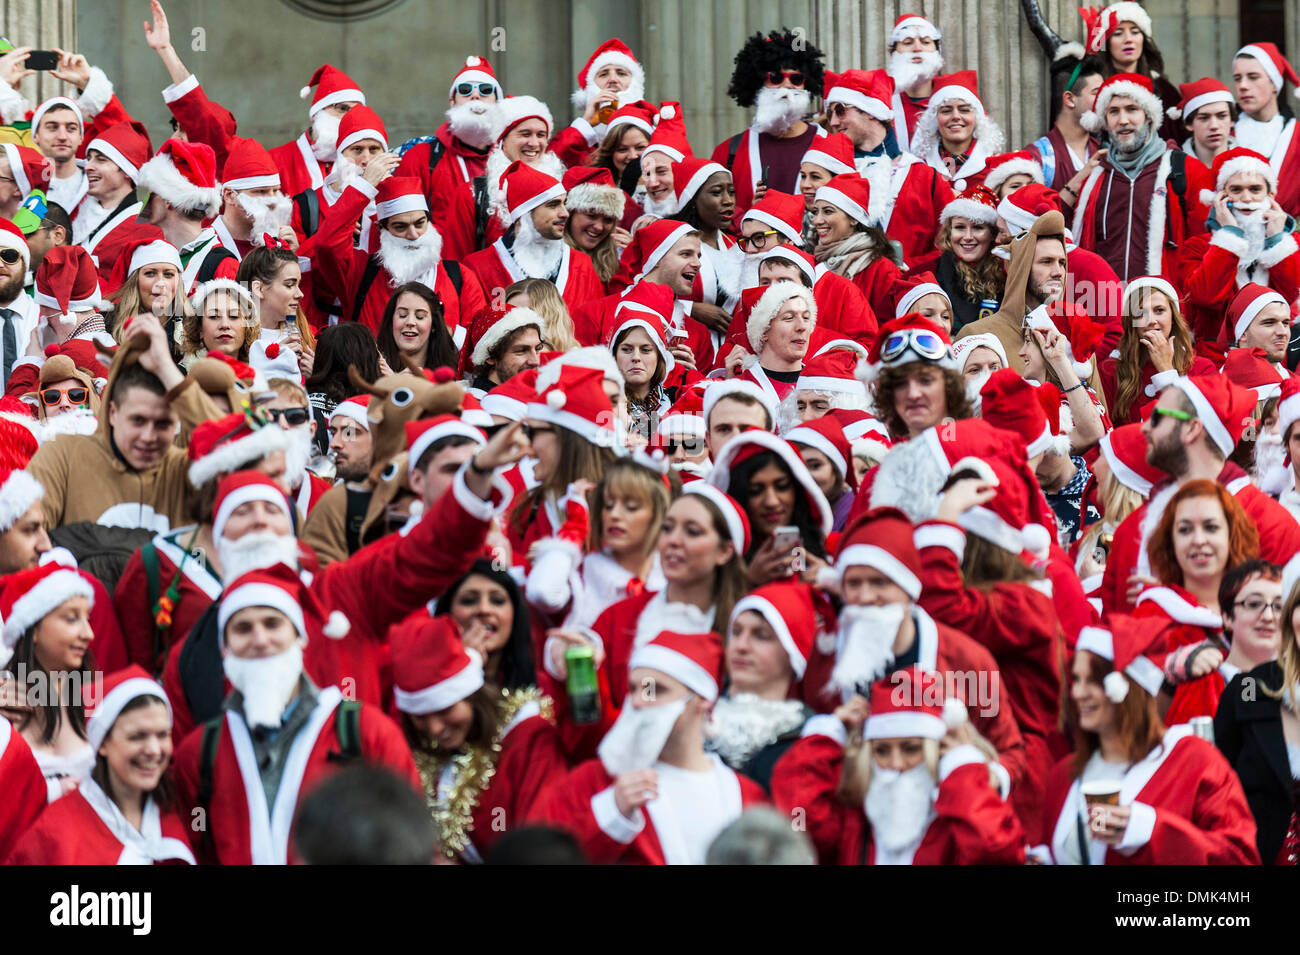 London, UK. 14th December, 2013.  Hundreds of Santas gather on the steps of St Pauls Cathedral before they march off to meet up with groups of other Santas to celebrate the annual Santacon.  Photographer: Gordon Scammell/Alamy Live News Stock Photo